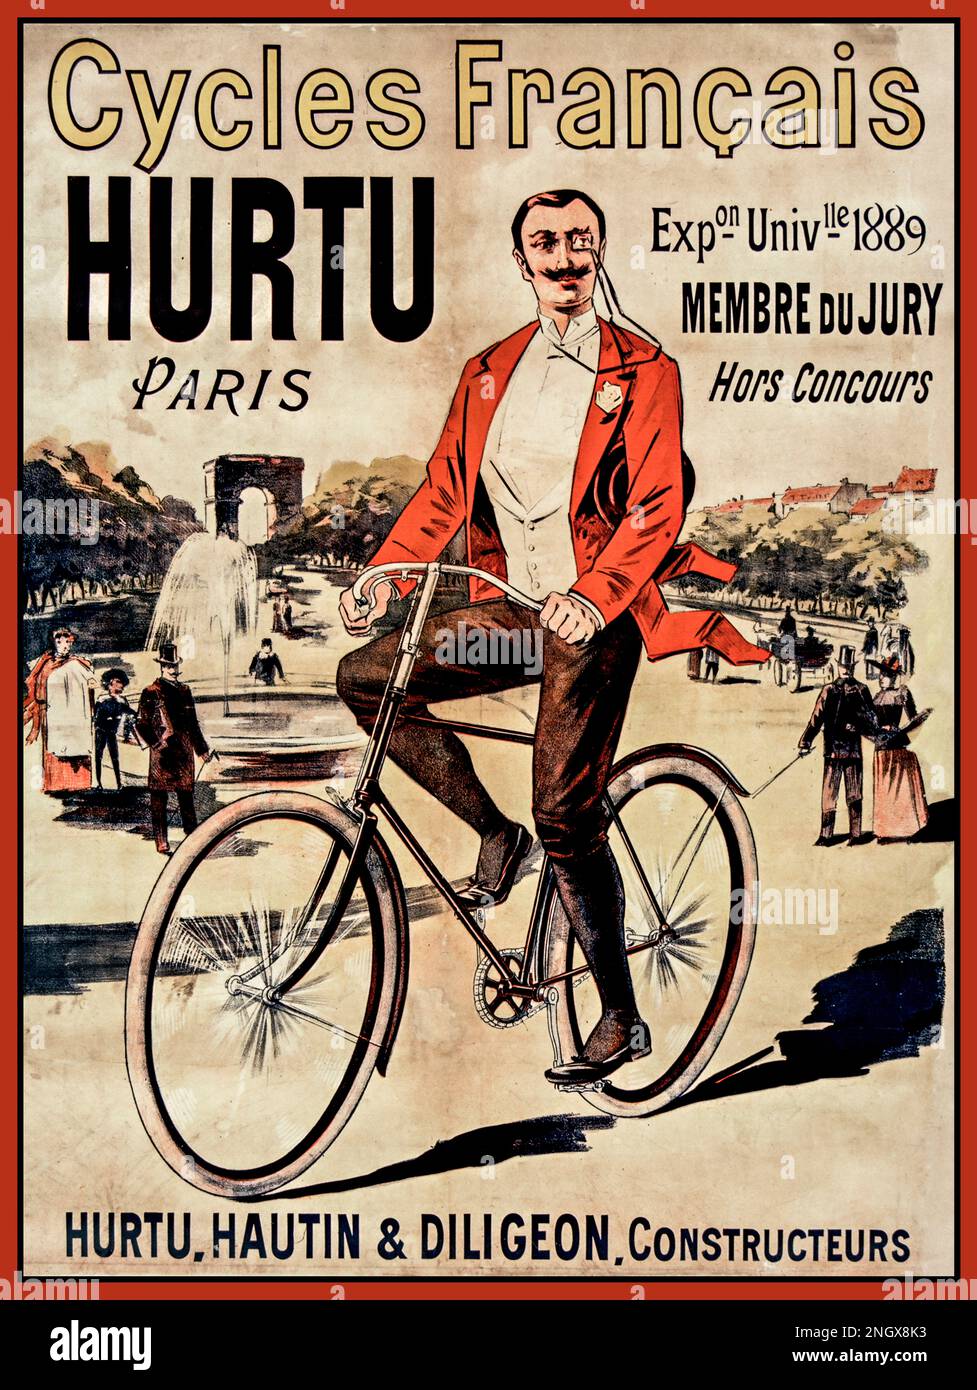 Vintage French Bicyles Poster 1800s Paris France Eugene Oge Cycles Francais HURTU for Universalle Exposition 1889 Stock Photo